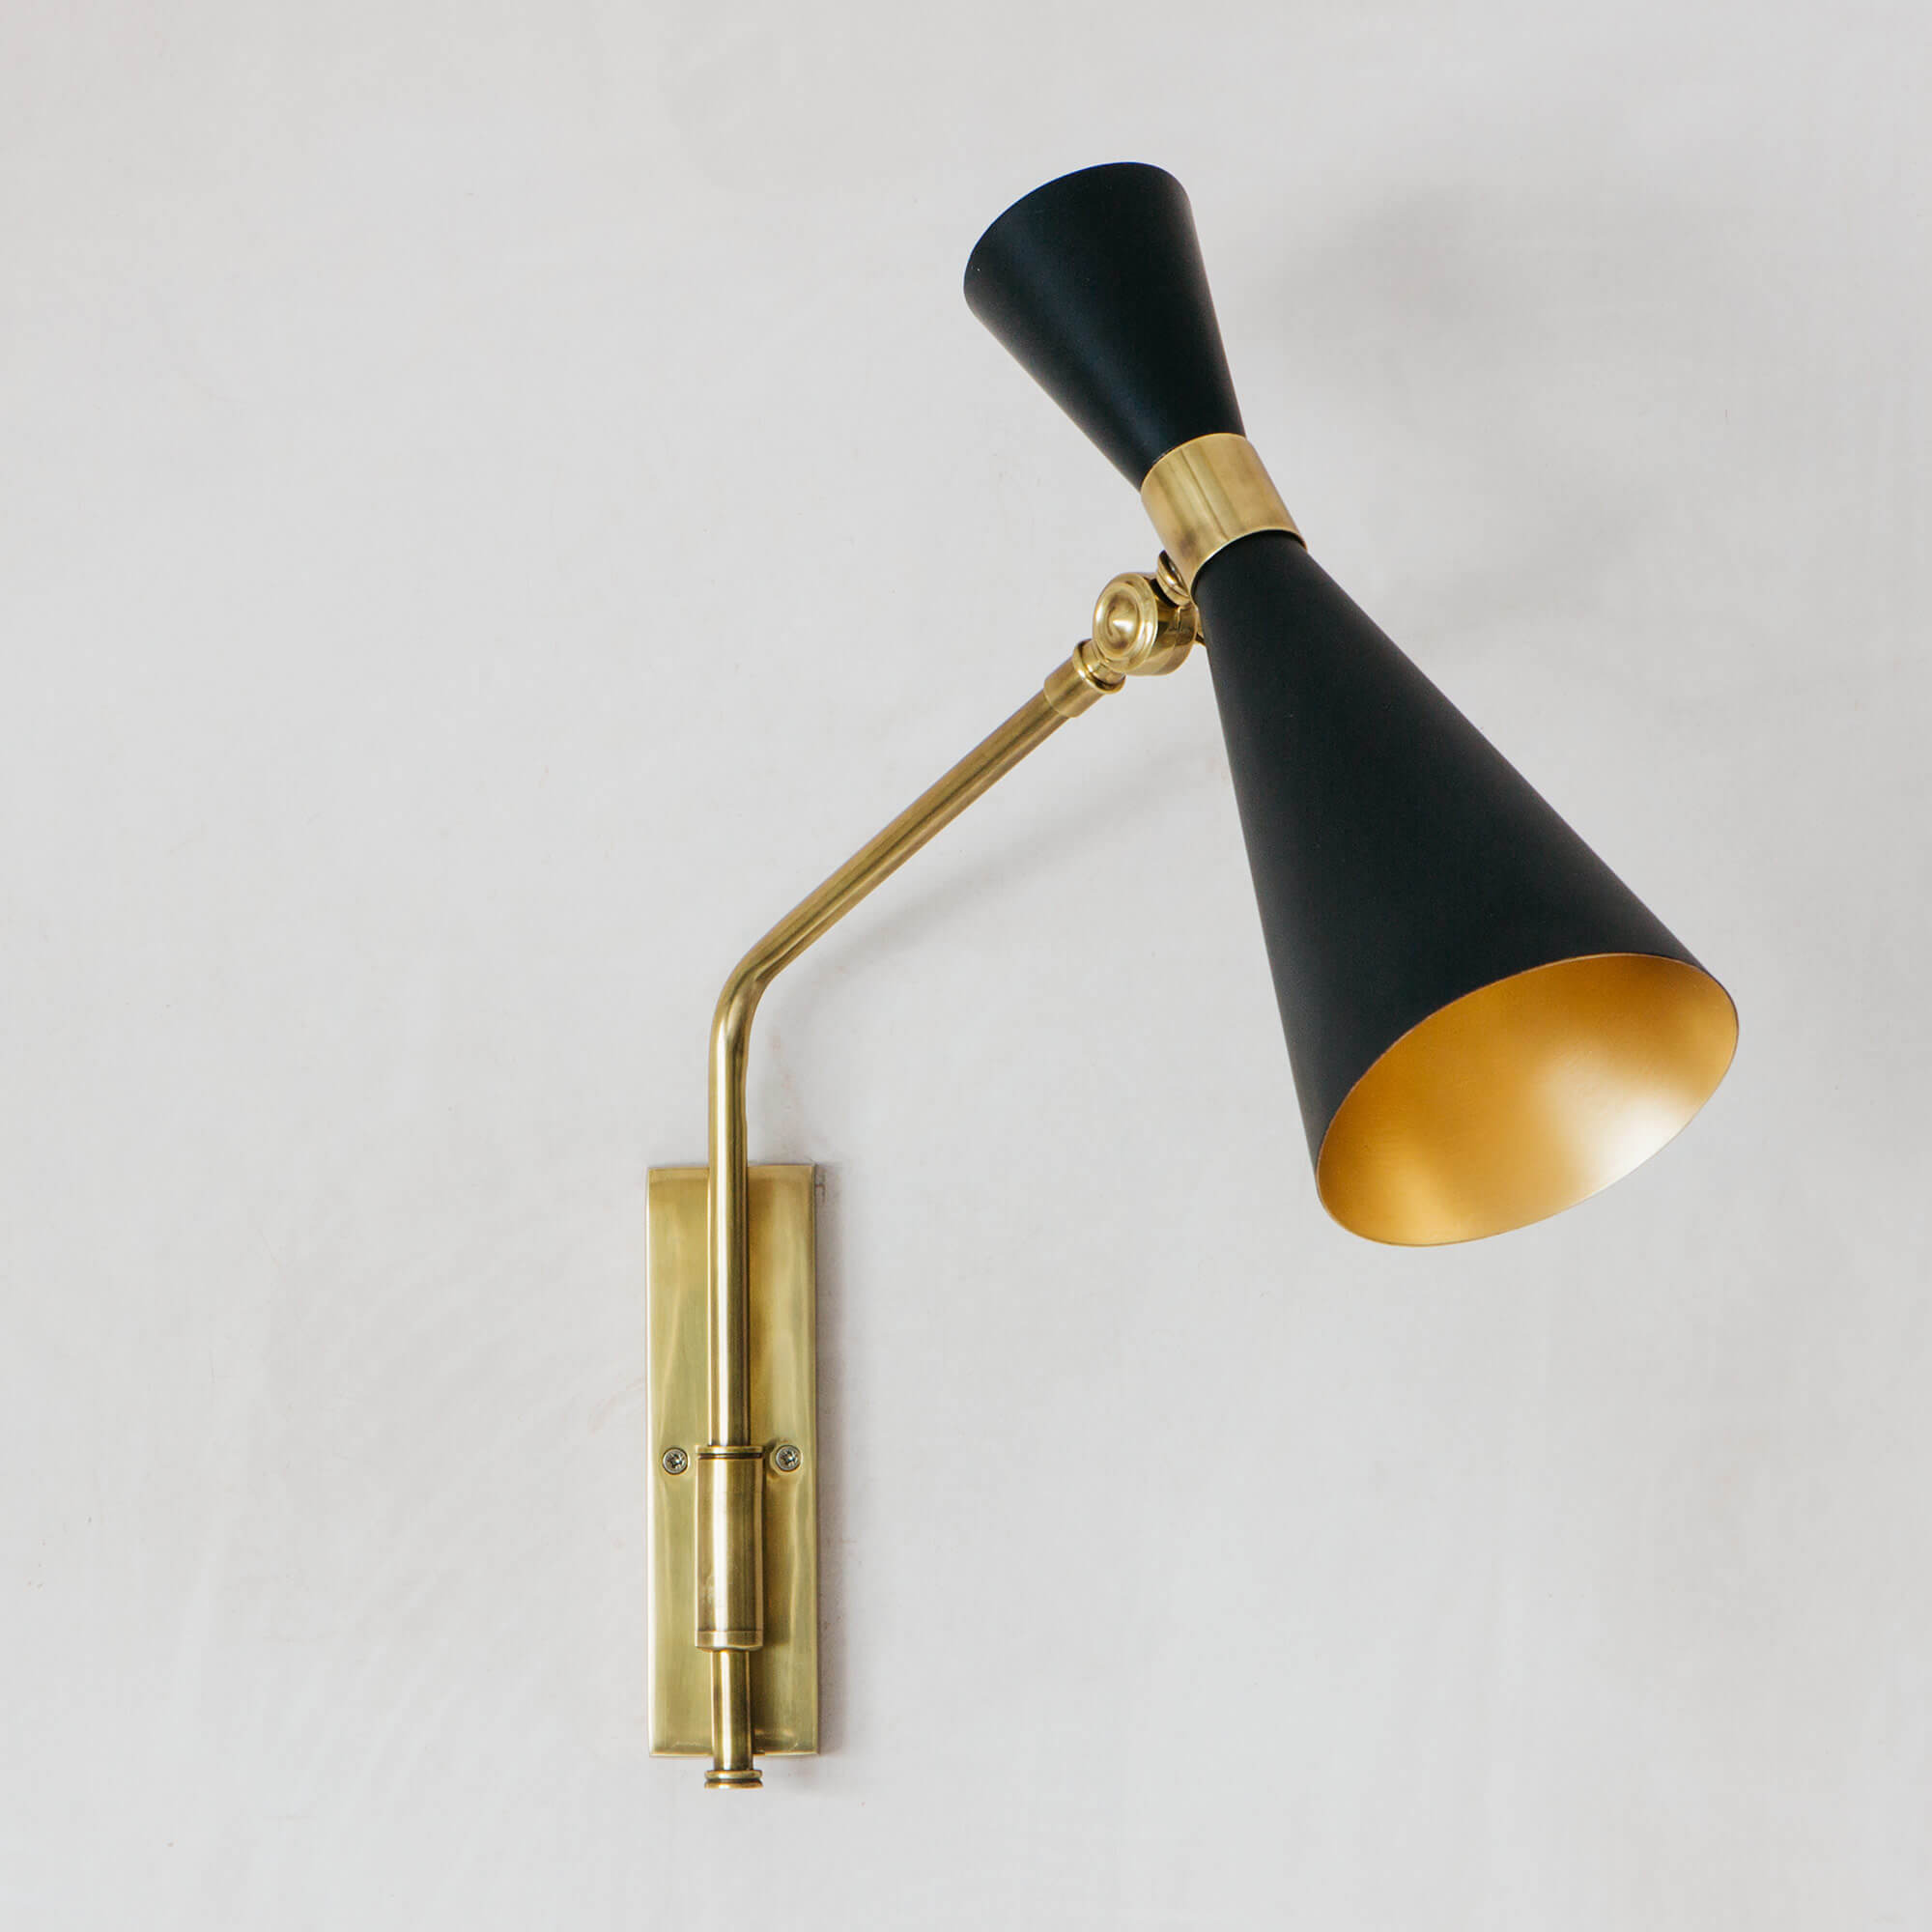 Black and Brass Wall Light - image 1